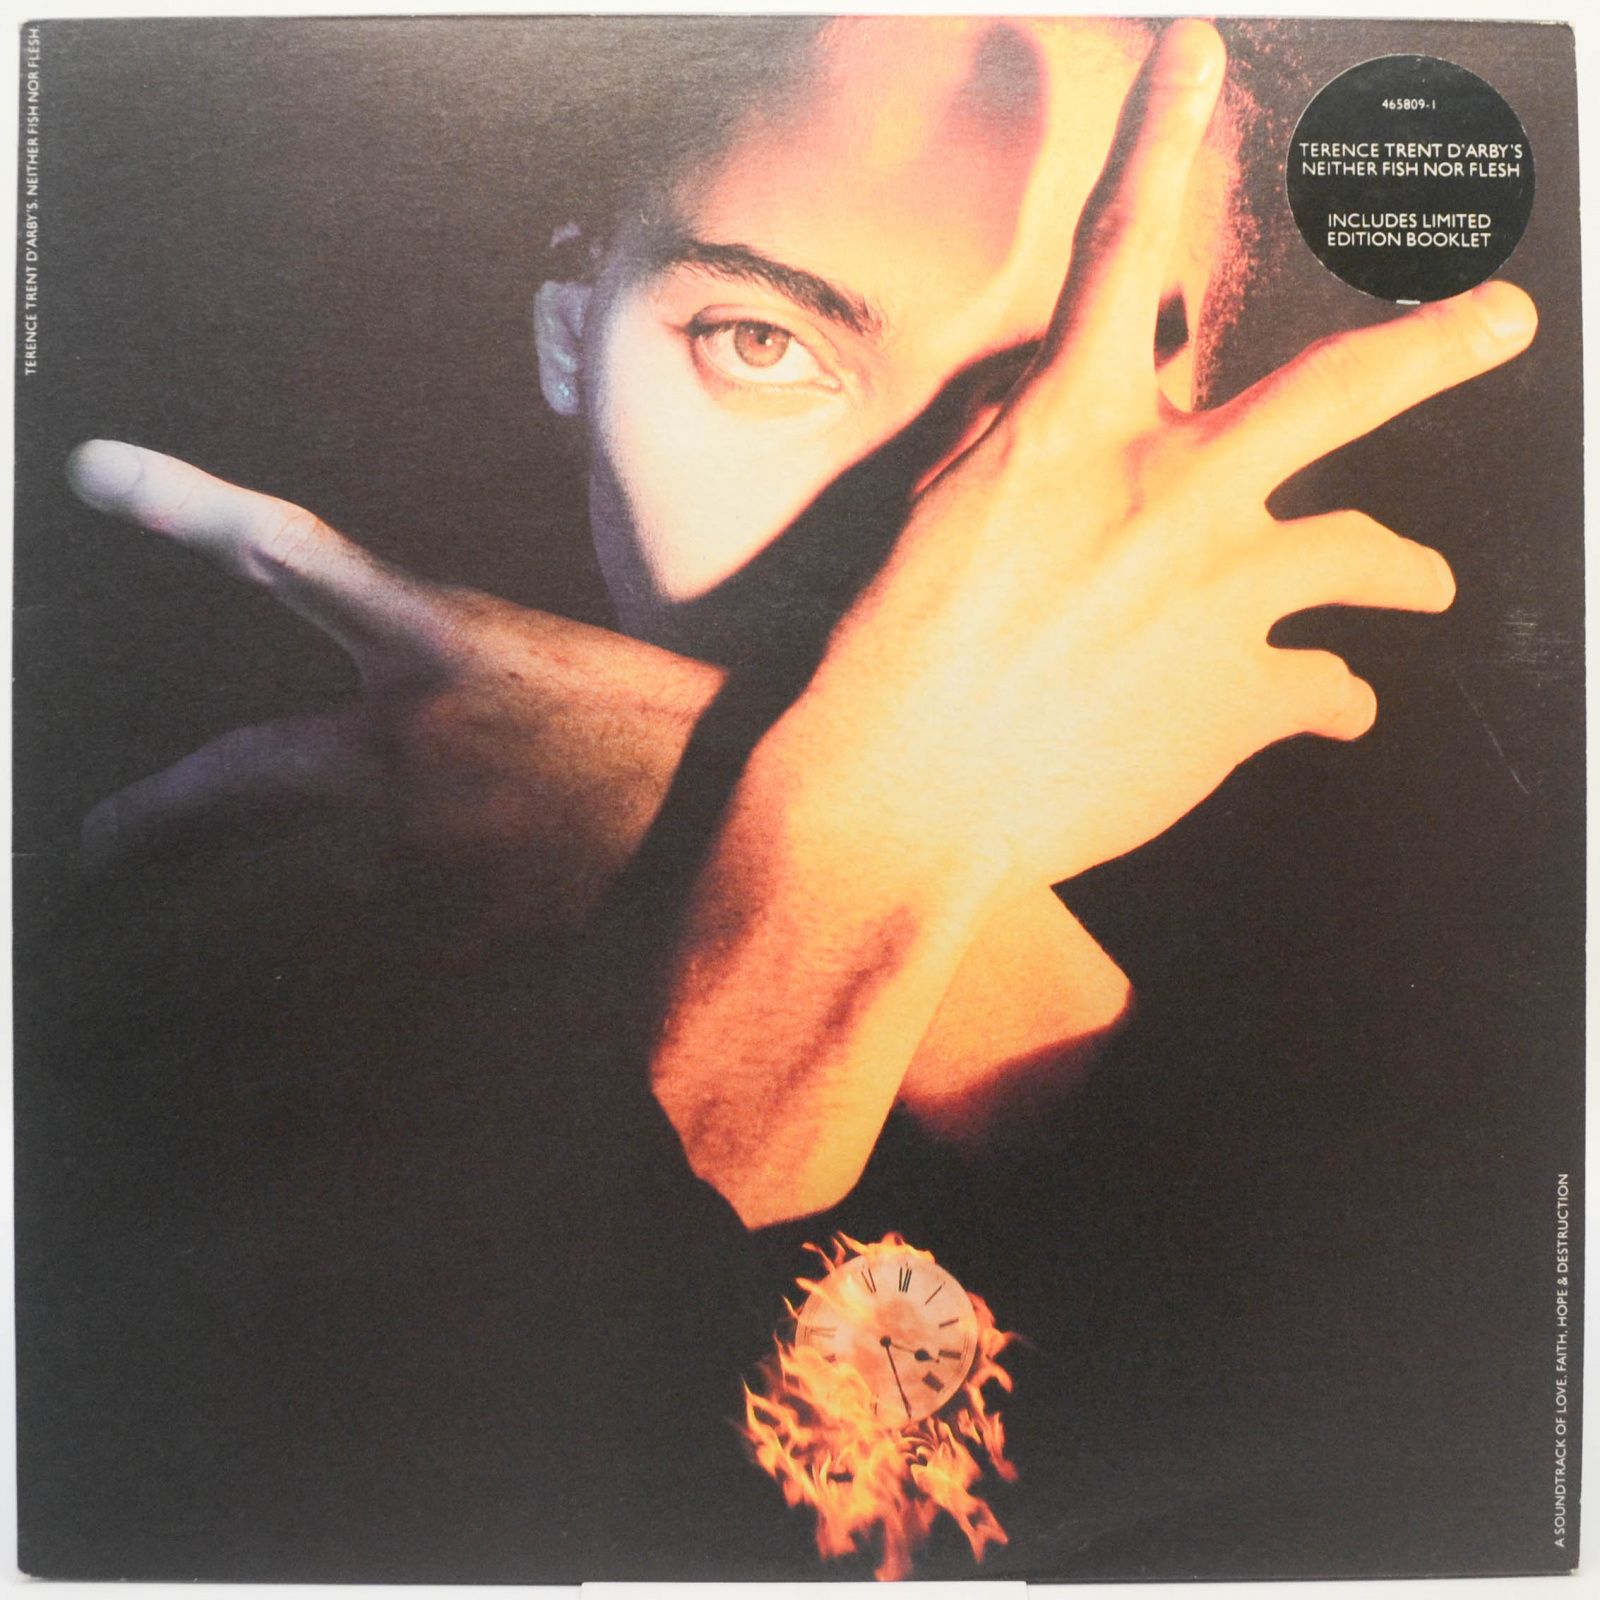 Terence Trent D'Arby — Terence Trent D'Arby's Neither Fish Nor Flesh: A Soundtrack Of Love, Faith, Hope And Destruction OST, 1989